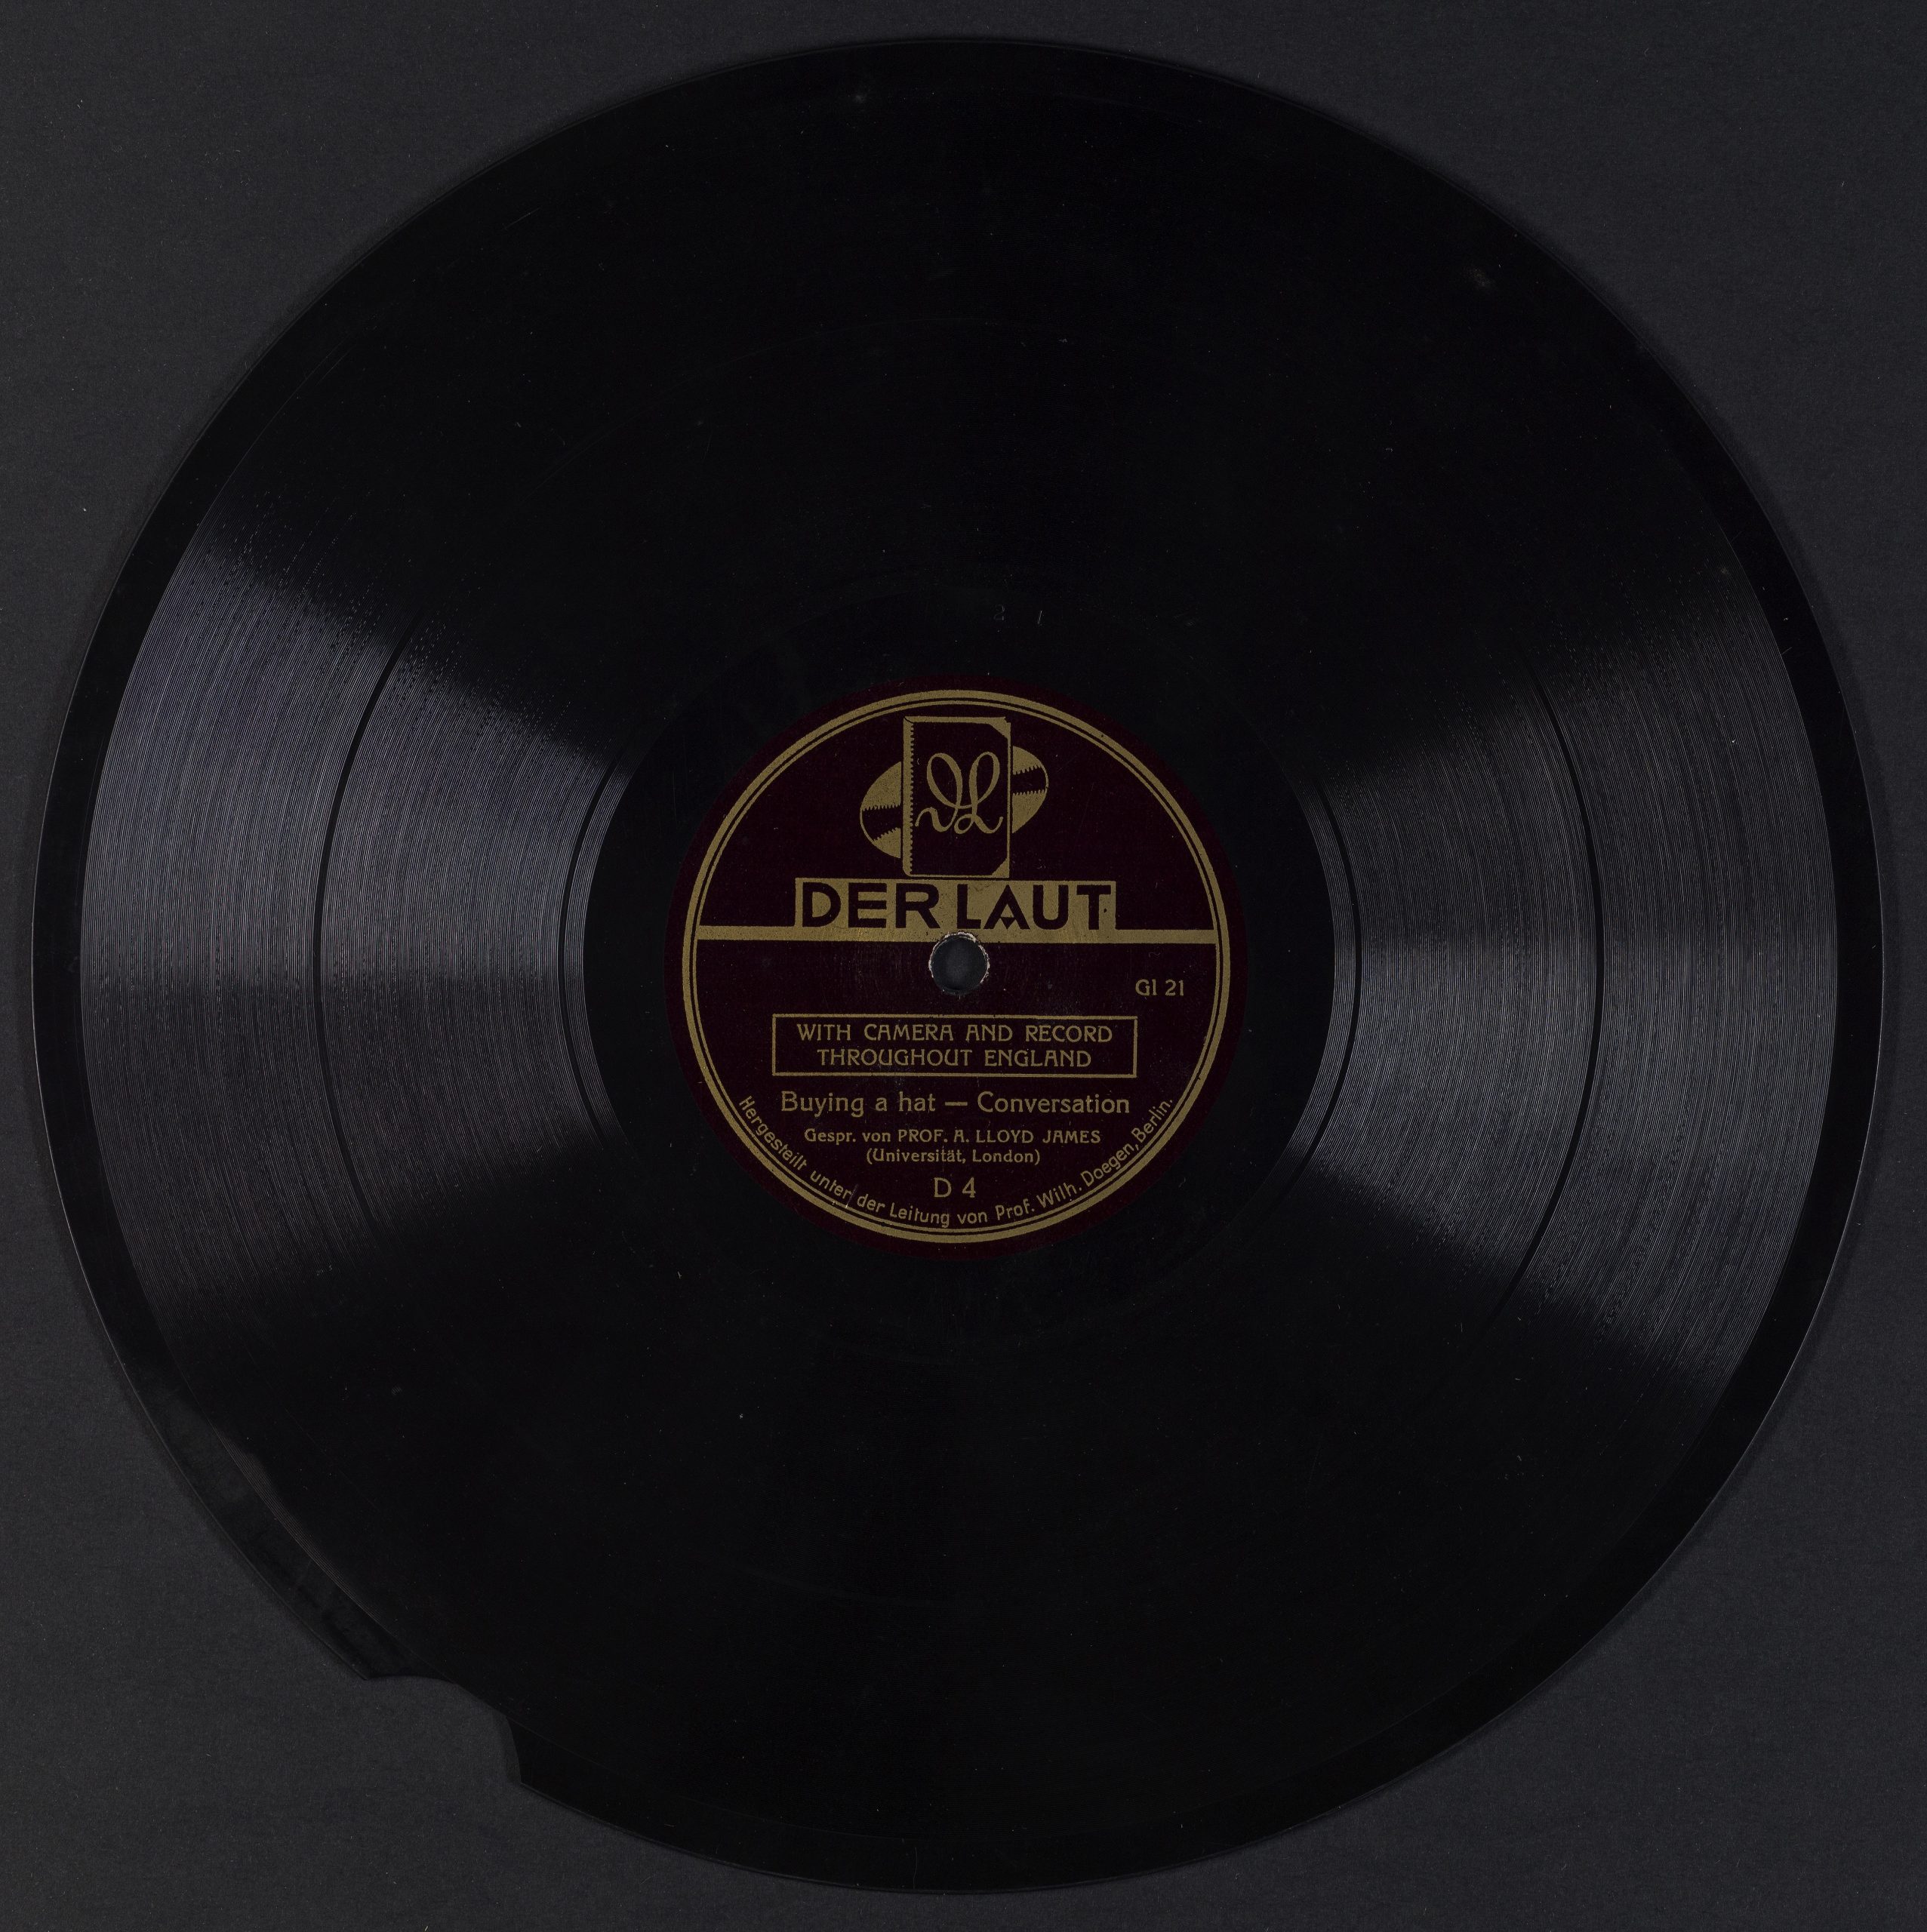 DHM Recording T 98/12 – With Camera and Record, Disc 4, Side B: “Buying a Hat – Conversation”